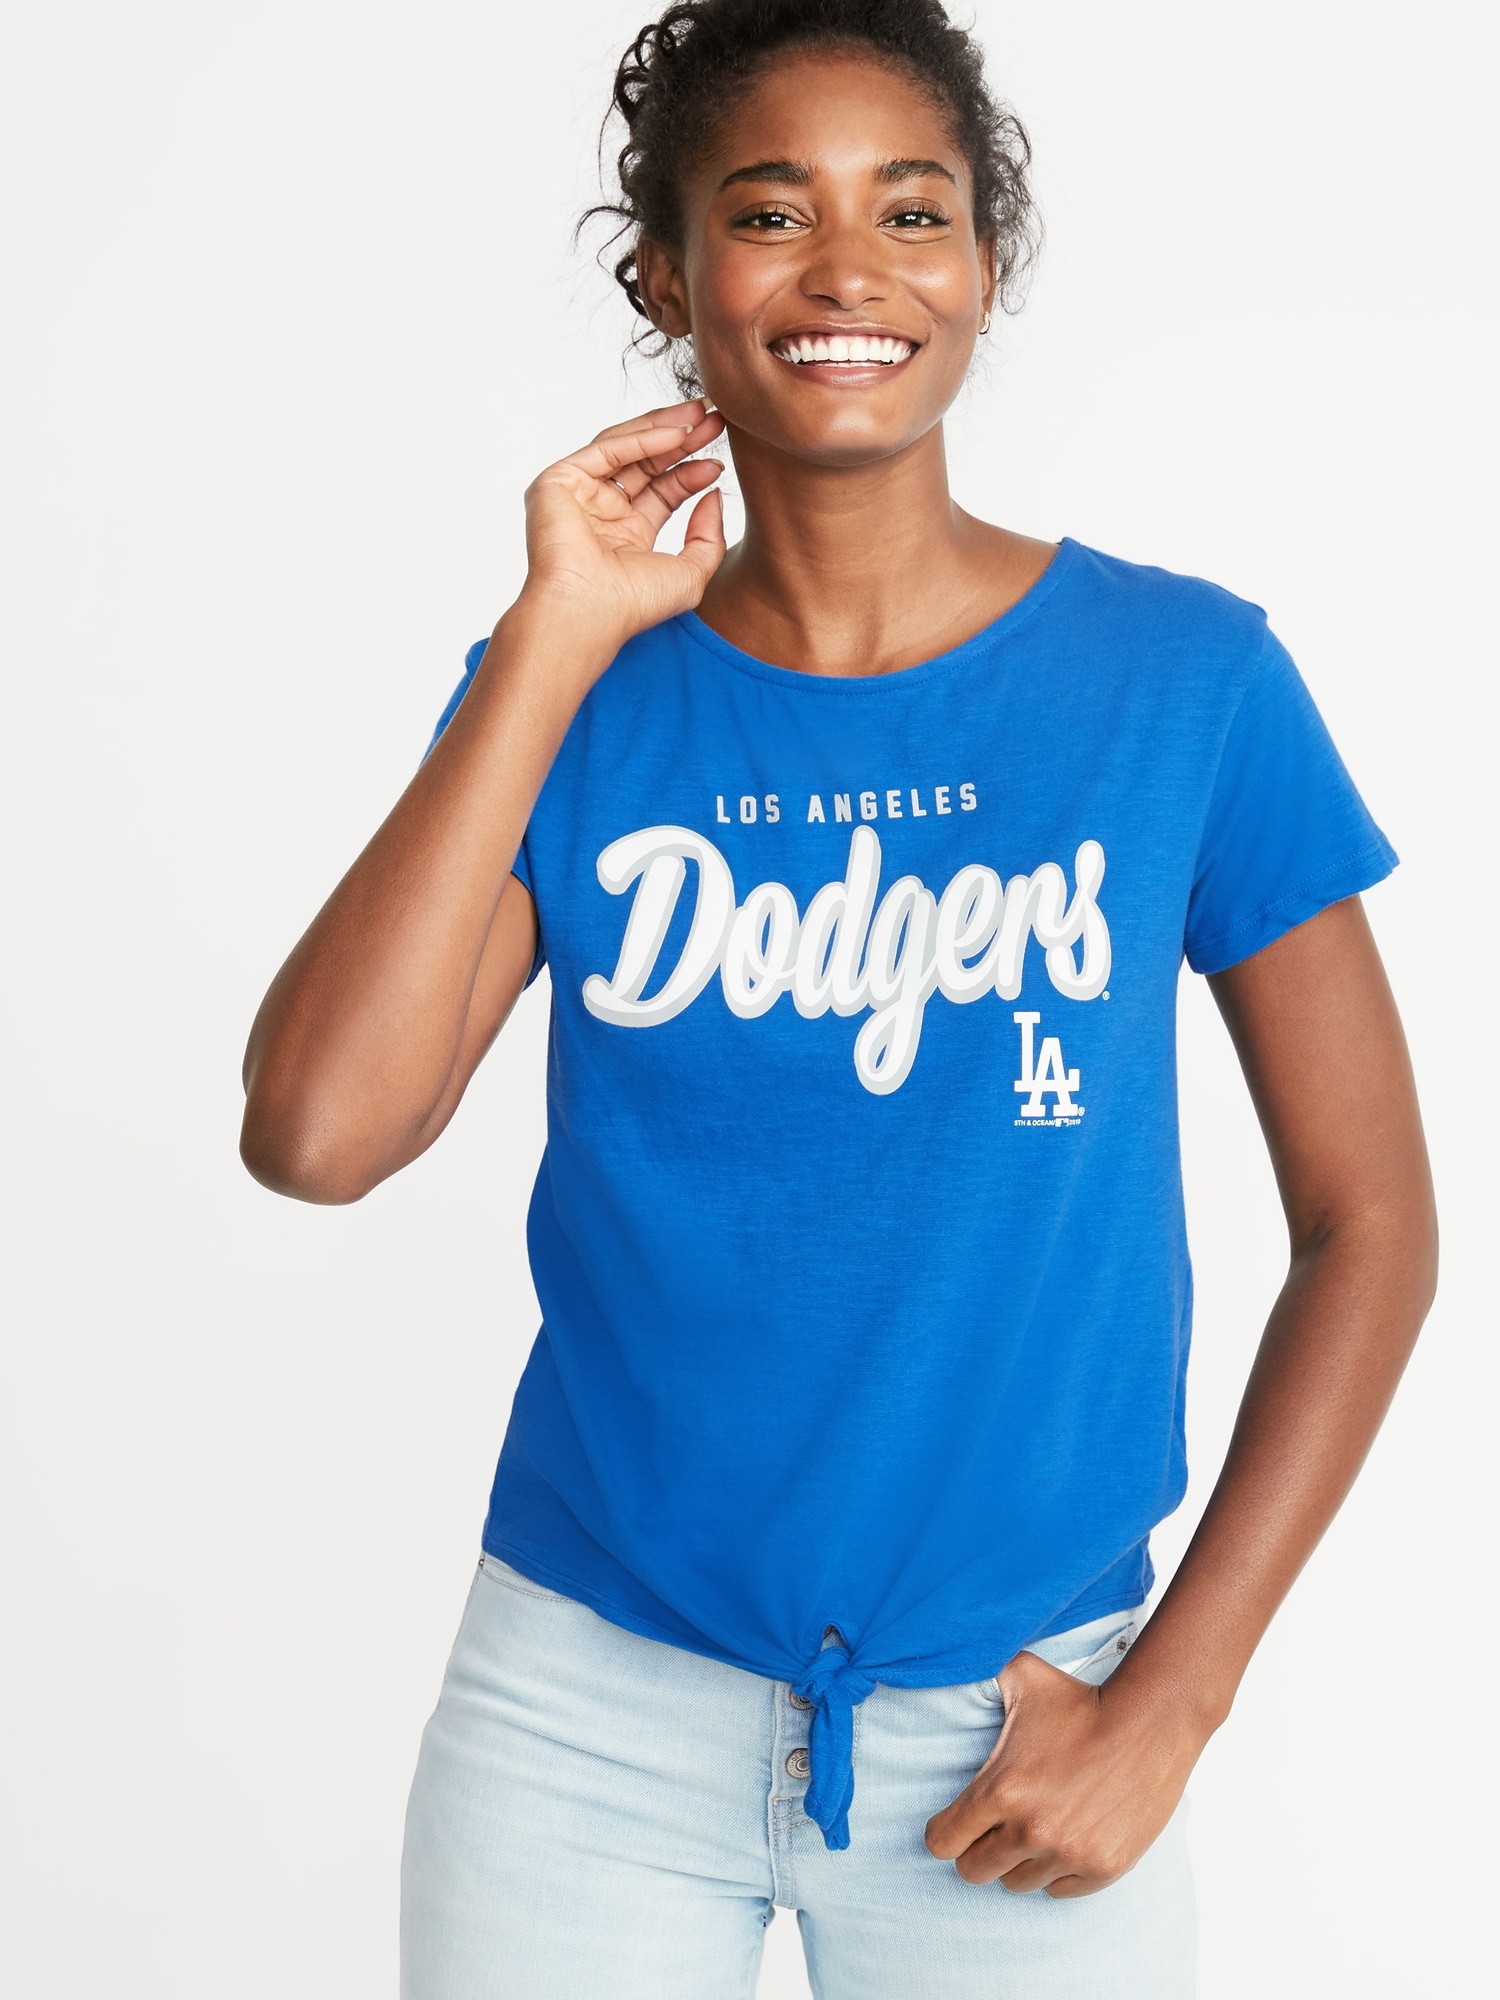 Short Sleeve Soft Dry Fit Red Dodgers Baseball Shirt Jersey for Unisex